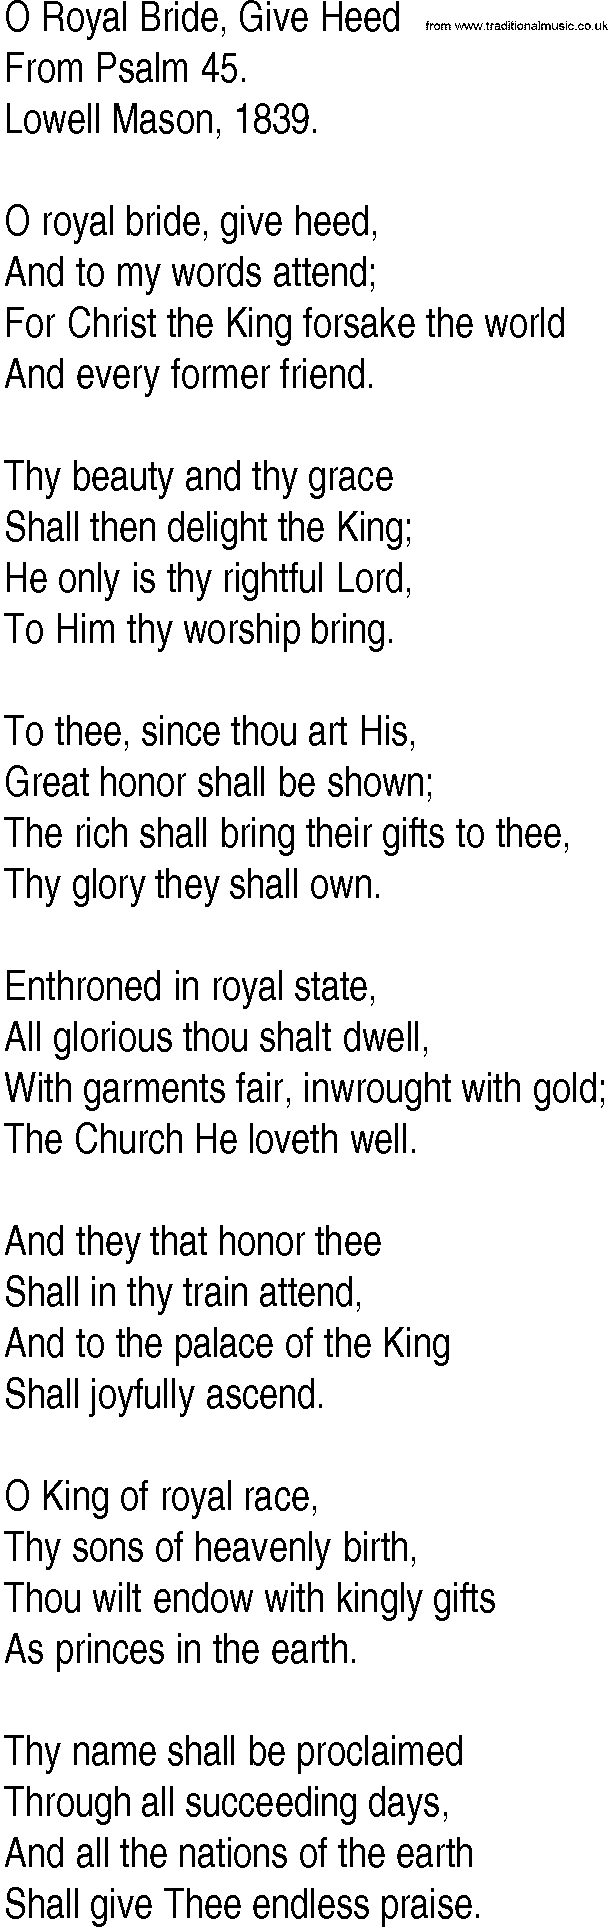 Hymn and Gospel Song: O Royal Bride, Give Heed by From Psalm lyrics